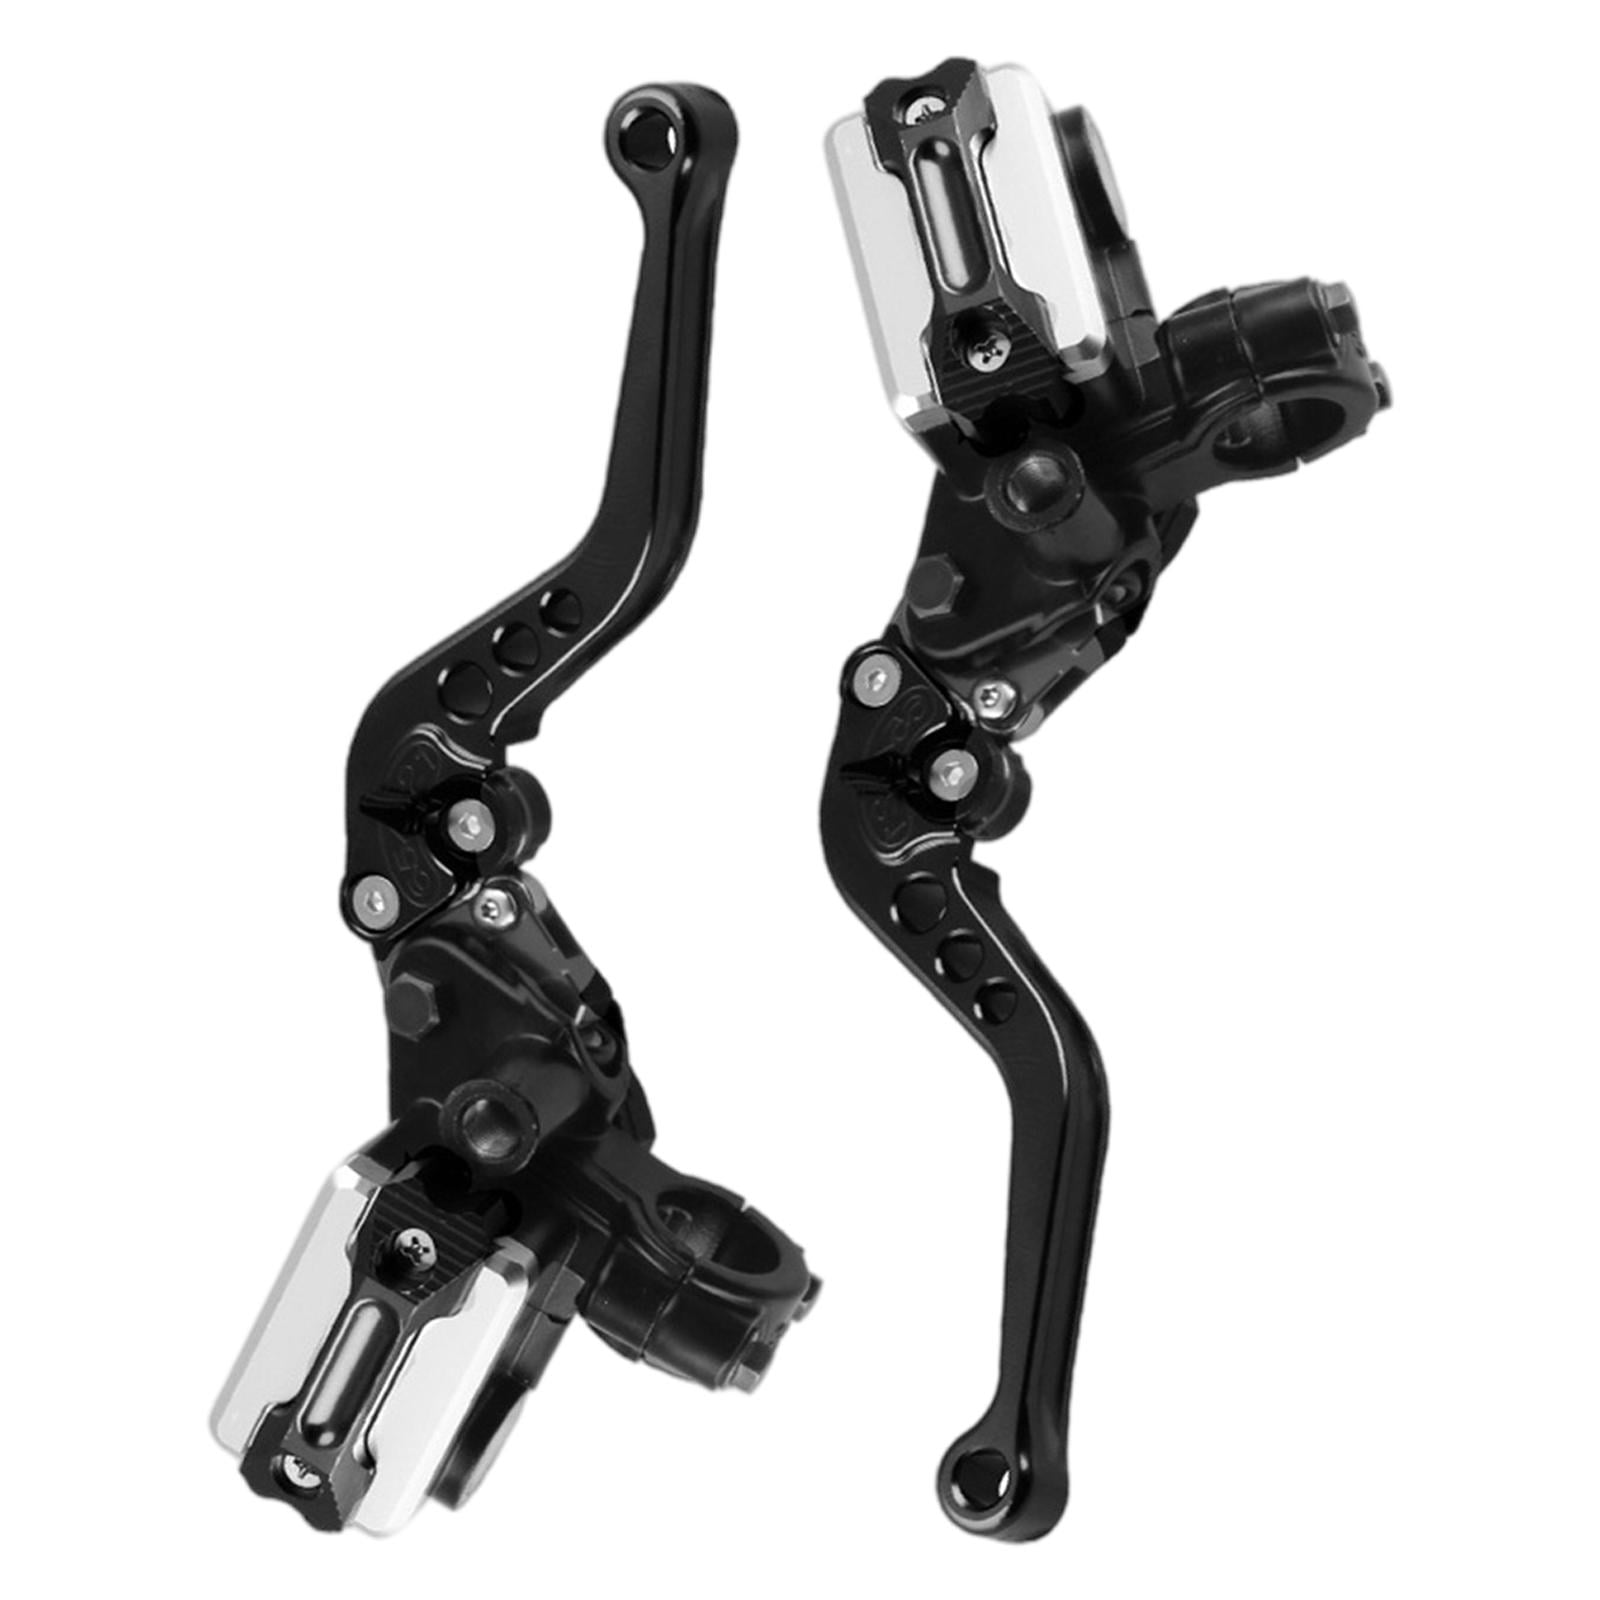 2x Universal CNC 7/8'' Motorcycle Brake Clutch Master Cylinder Lever Left+Right